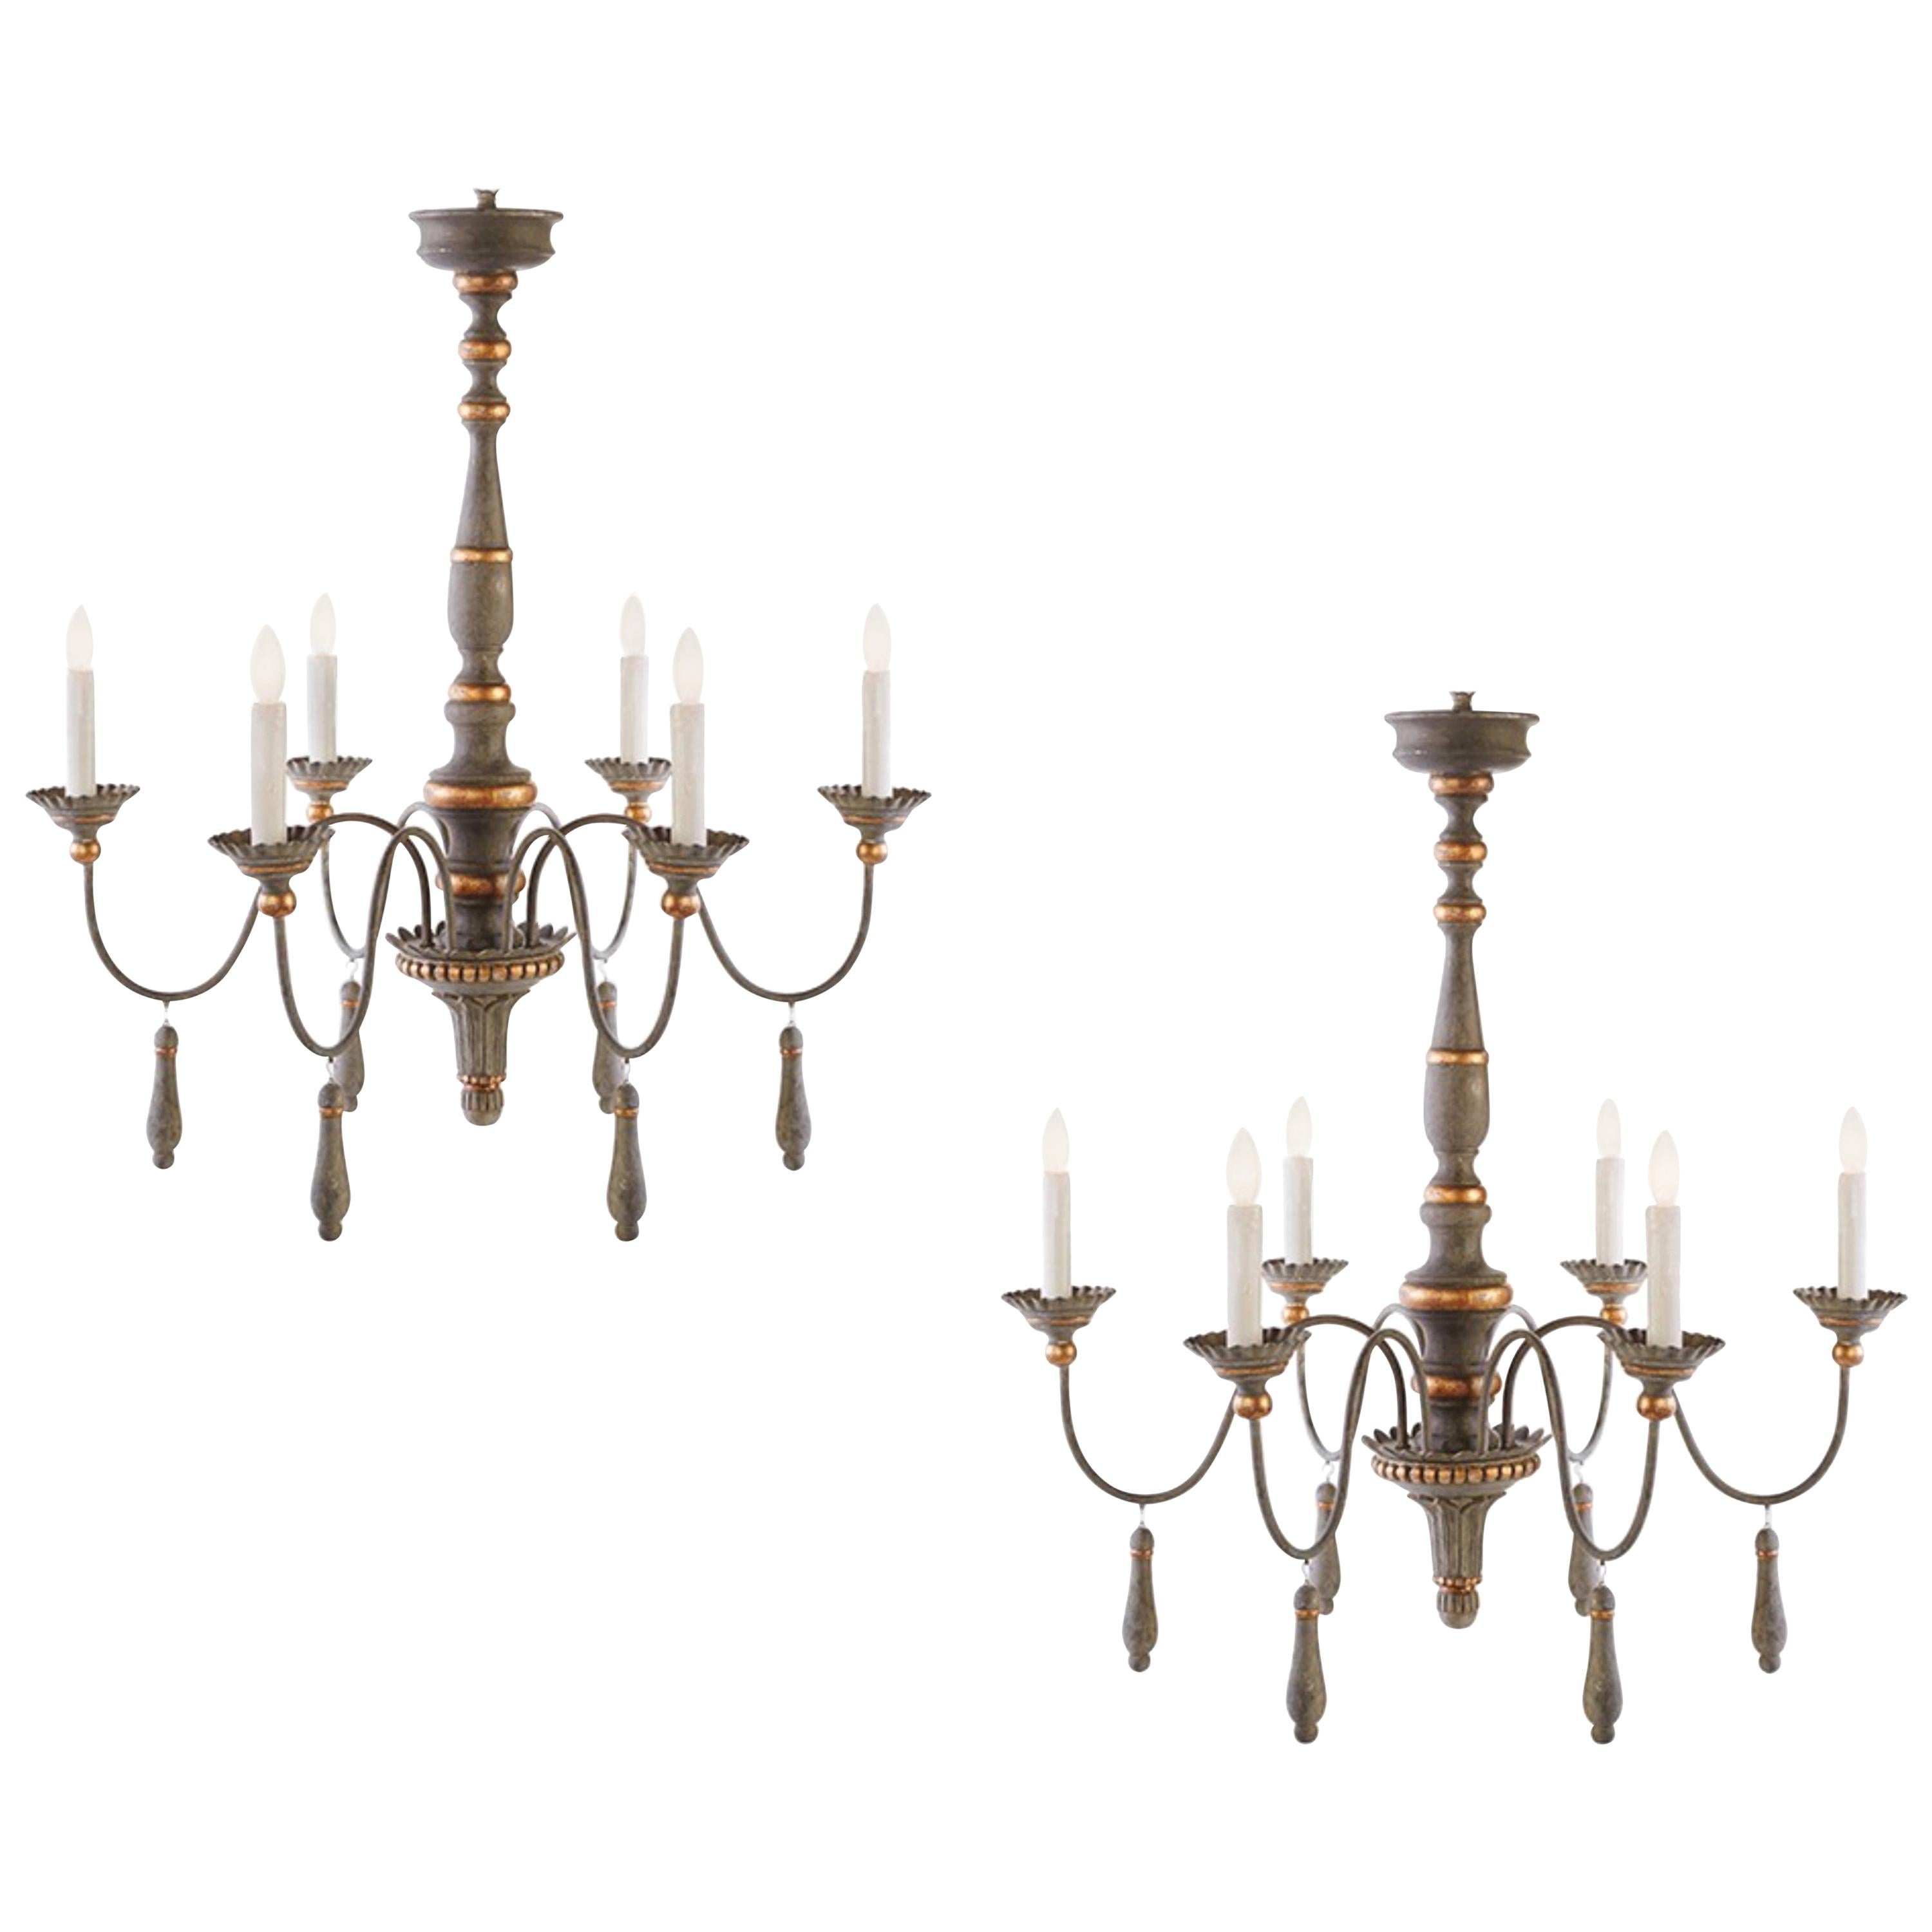 Two Chic Six-Arm Chandeliers in Lovely French Grey Finish, Gilt Accents.  For Sale